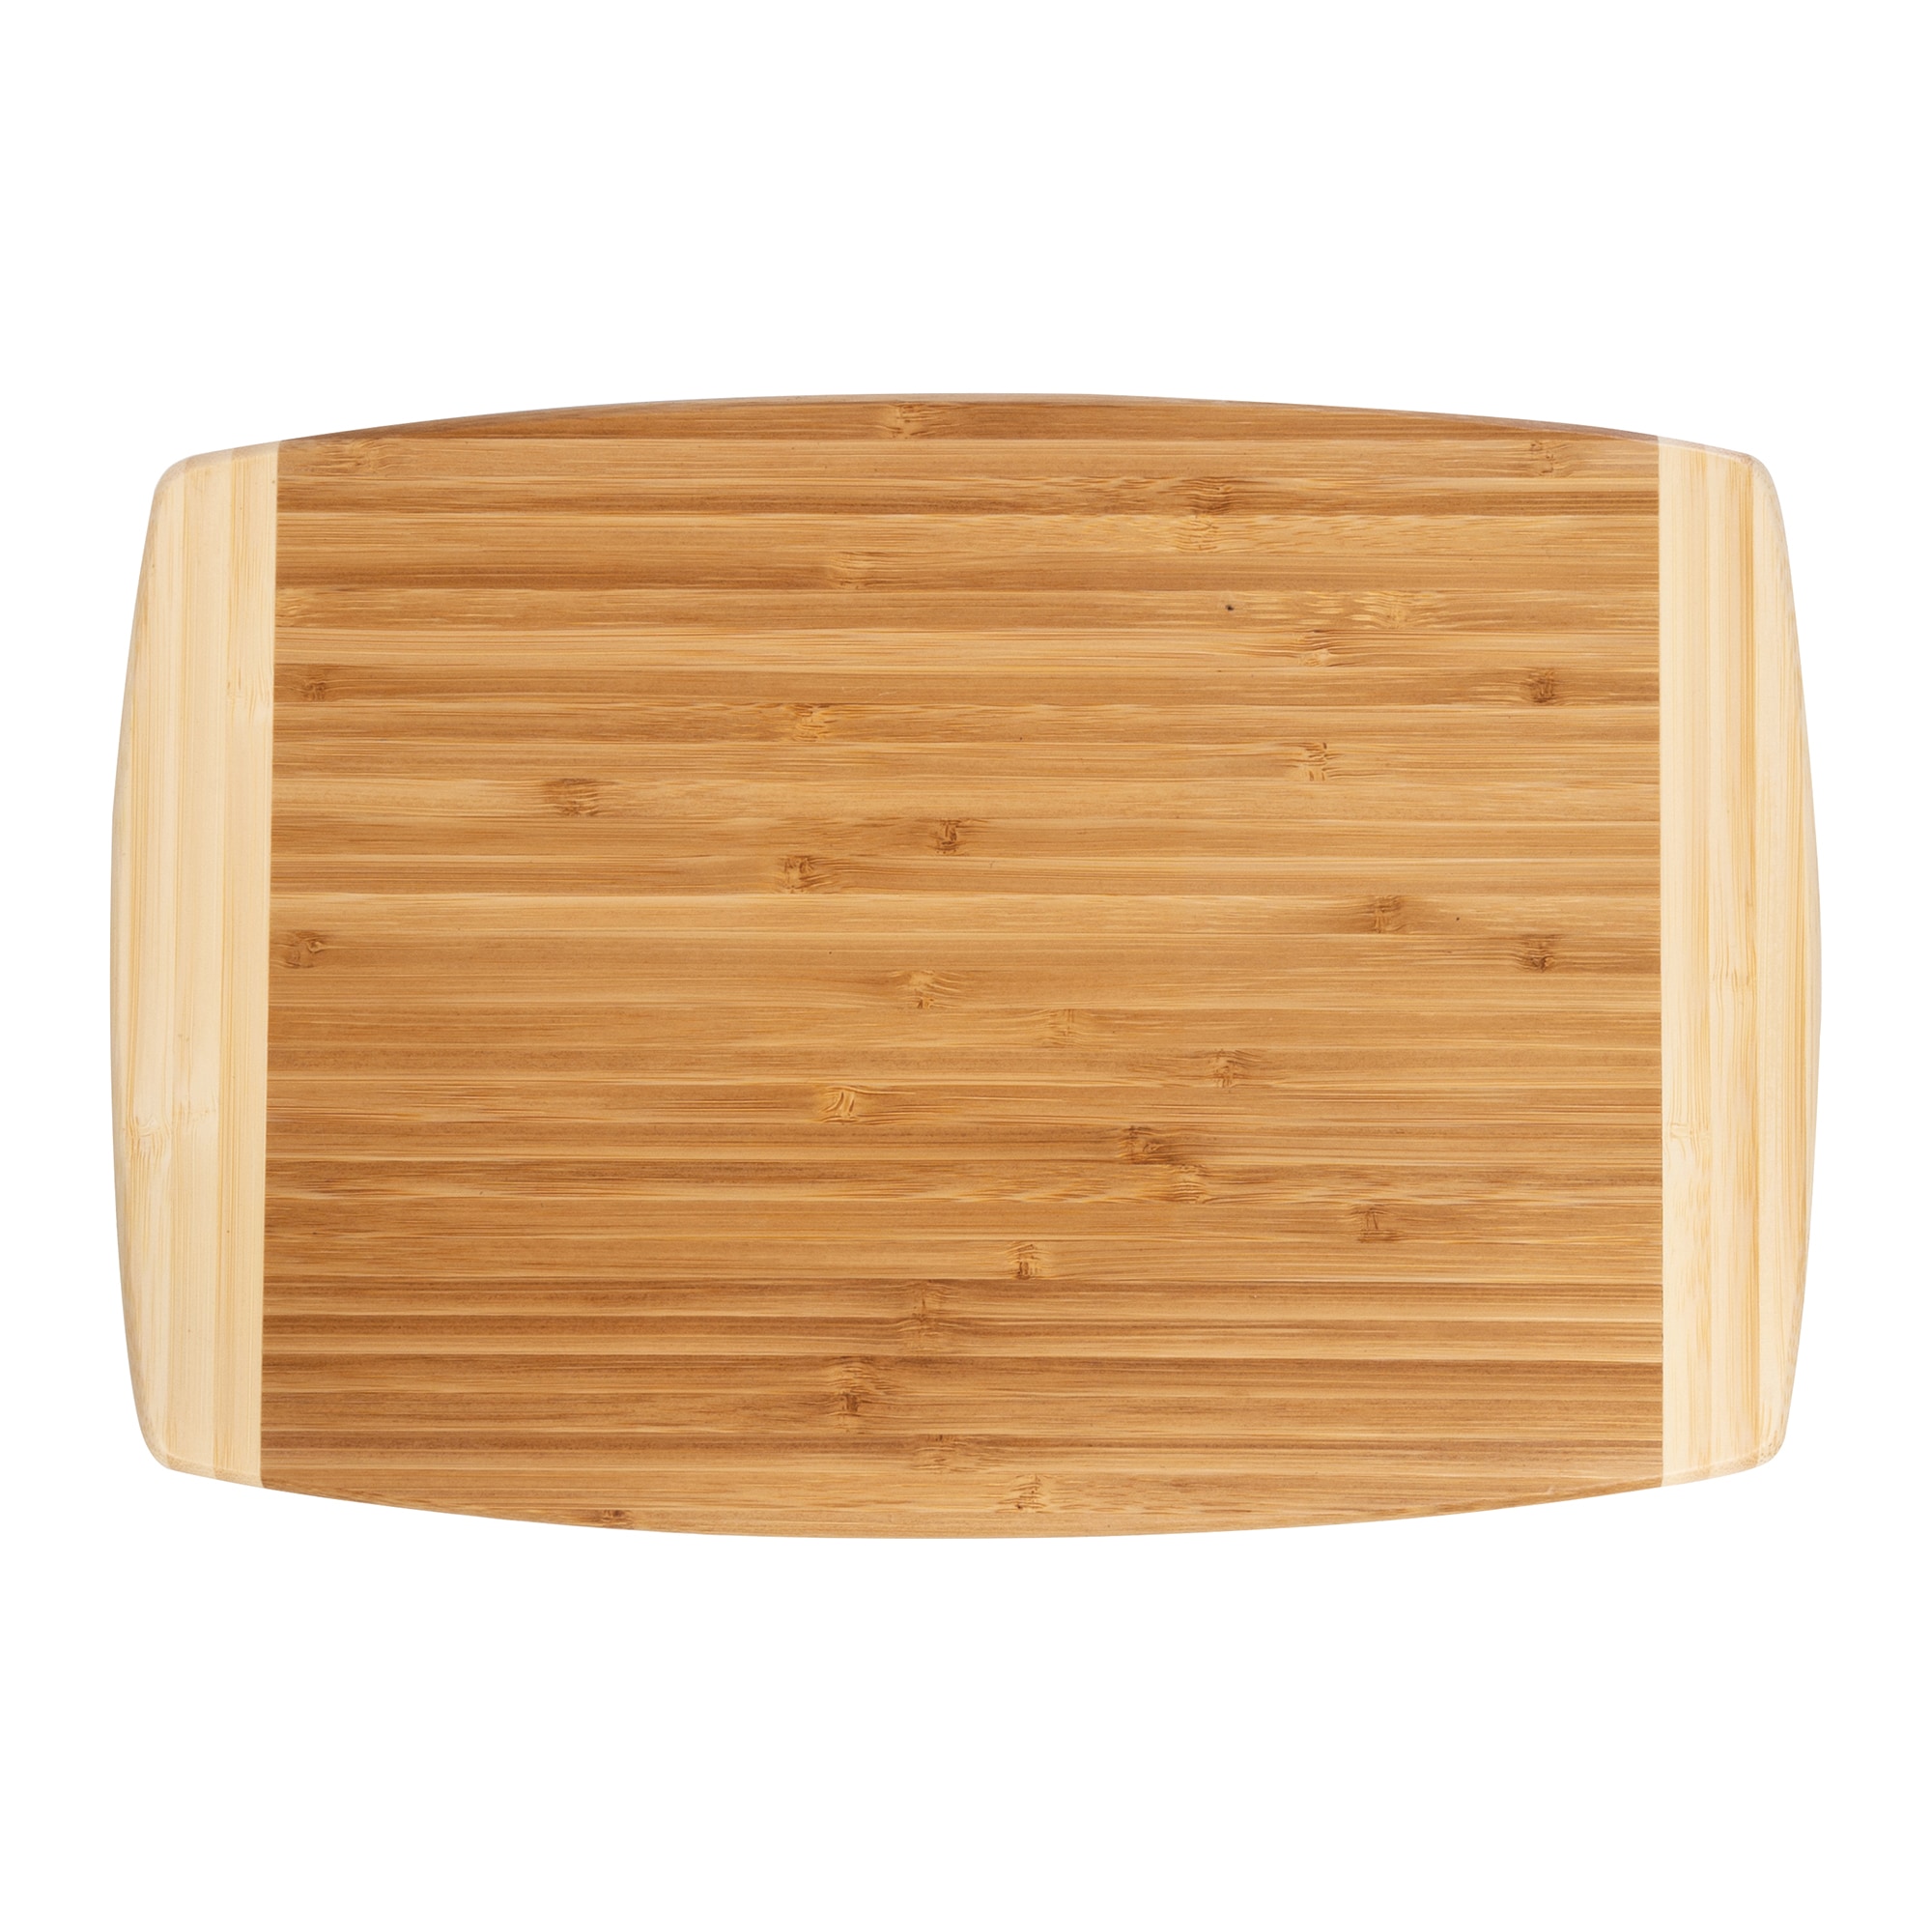 SMIRLY Large bamboo Cutting Board for Kitchen: Large Bamboo Cutting Board  with Juice Groove, Wooden Cutting Boards for Kitchen, Butcher Block Cutting